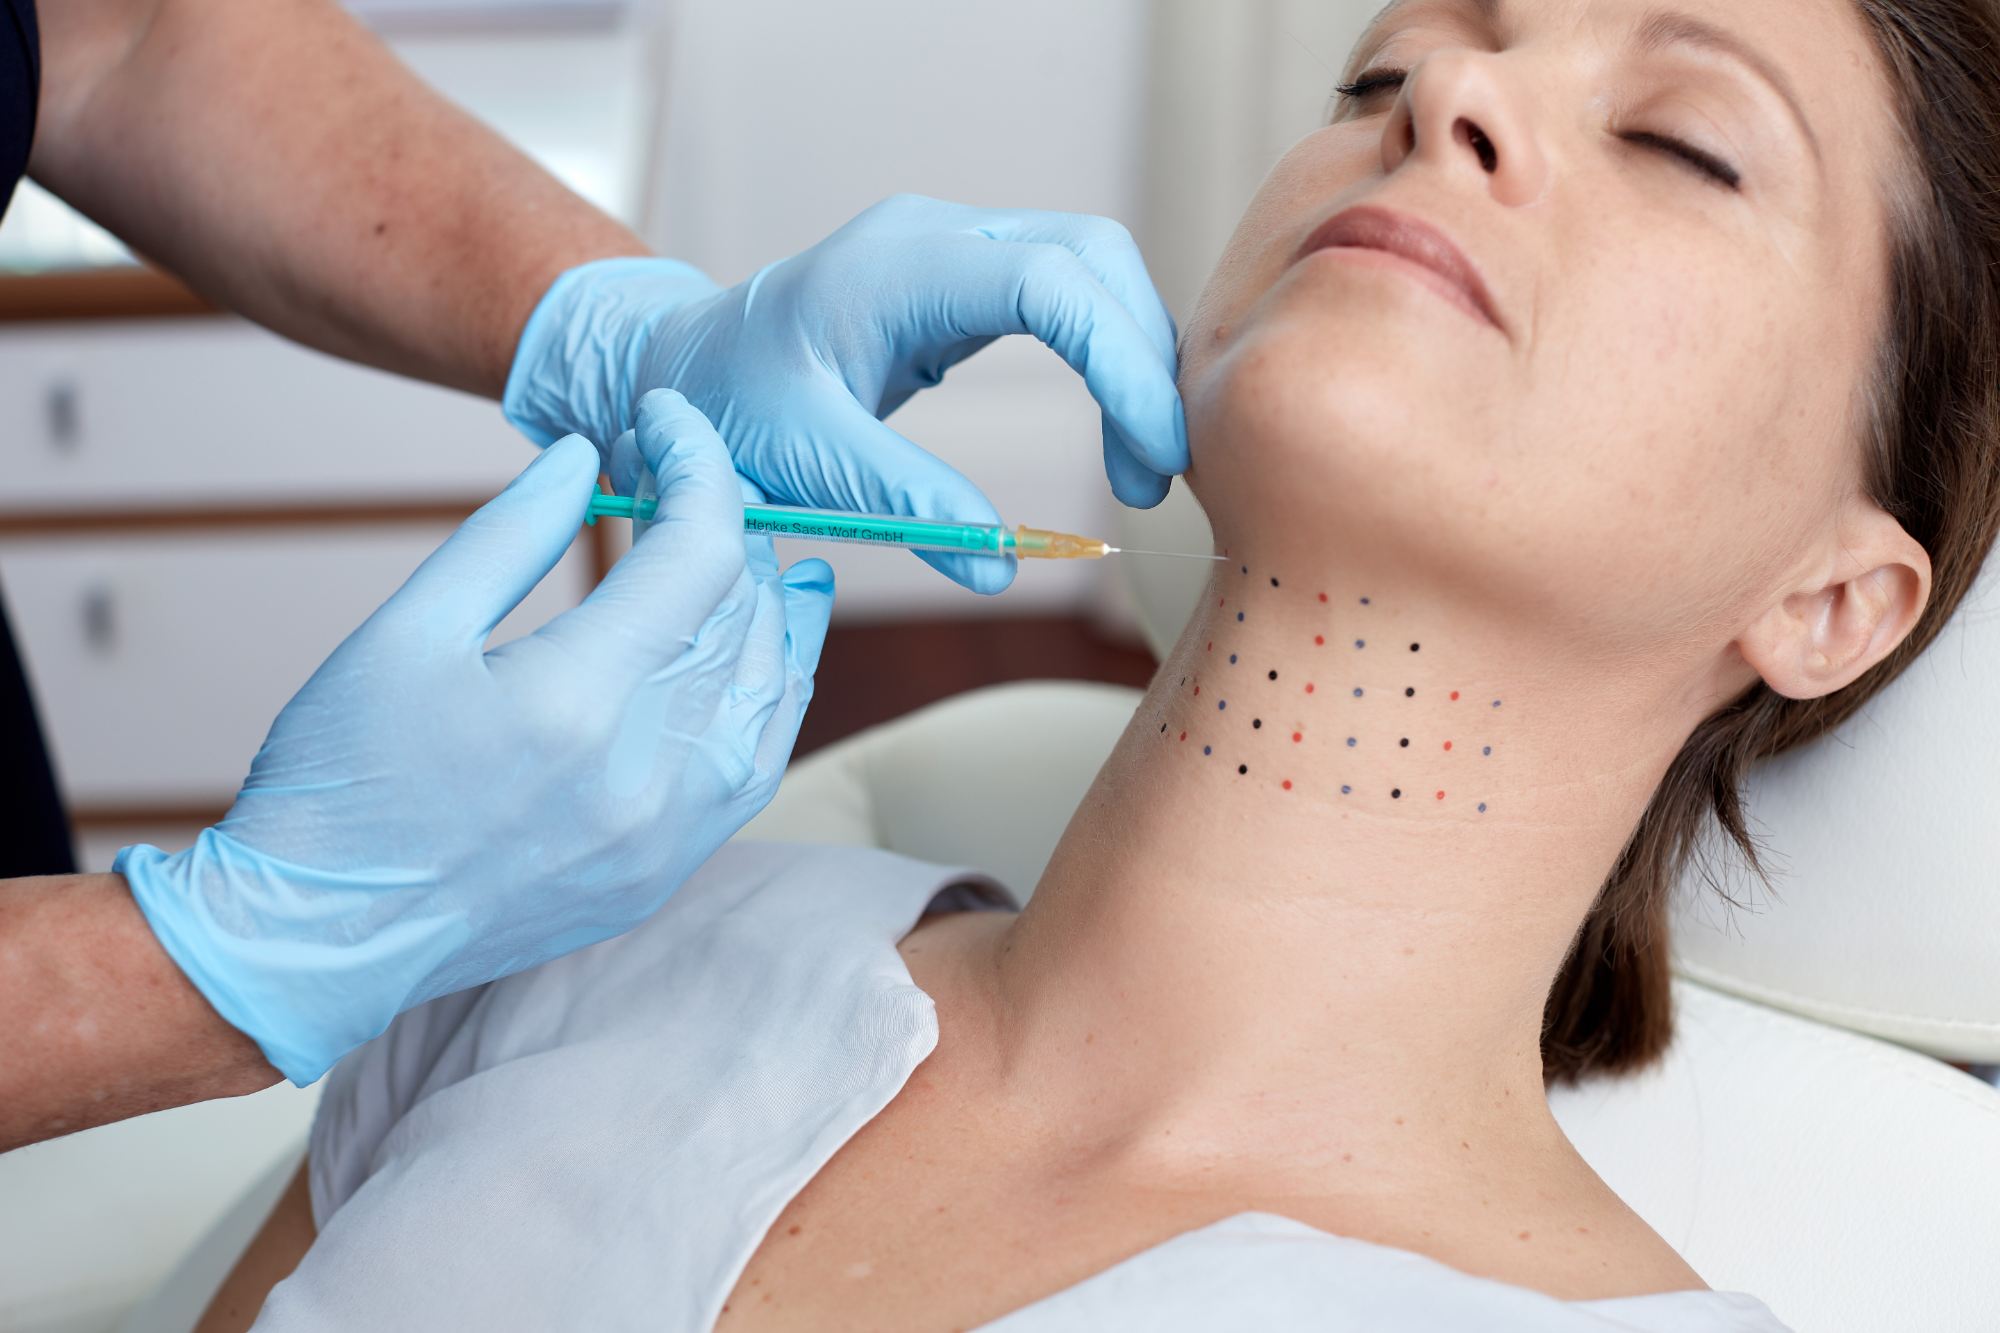 The Best and Effective Double Chin Removal Treatments